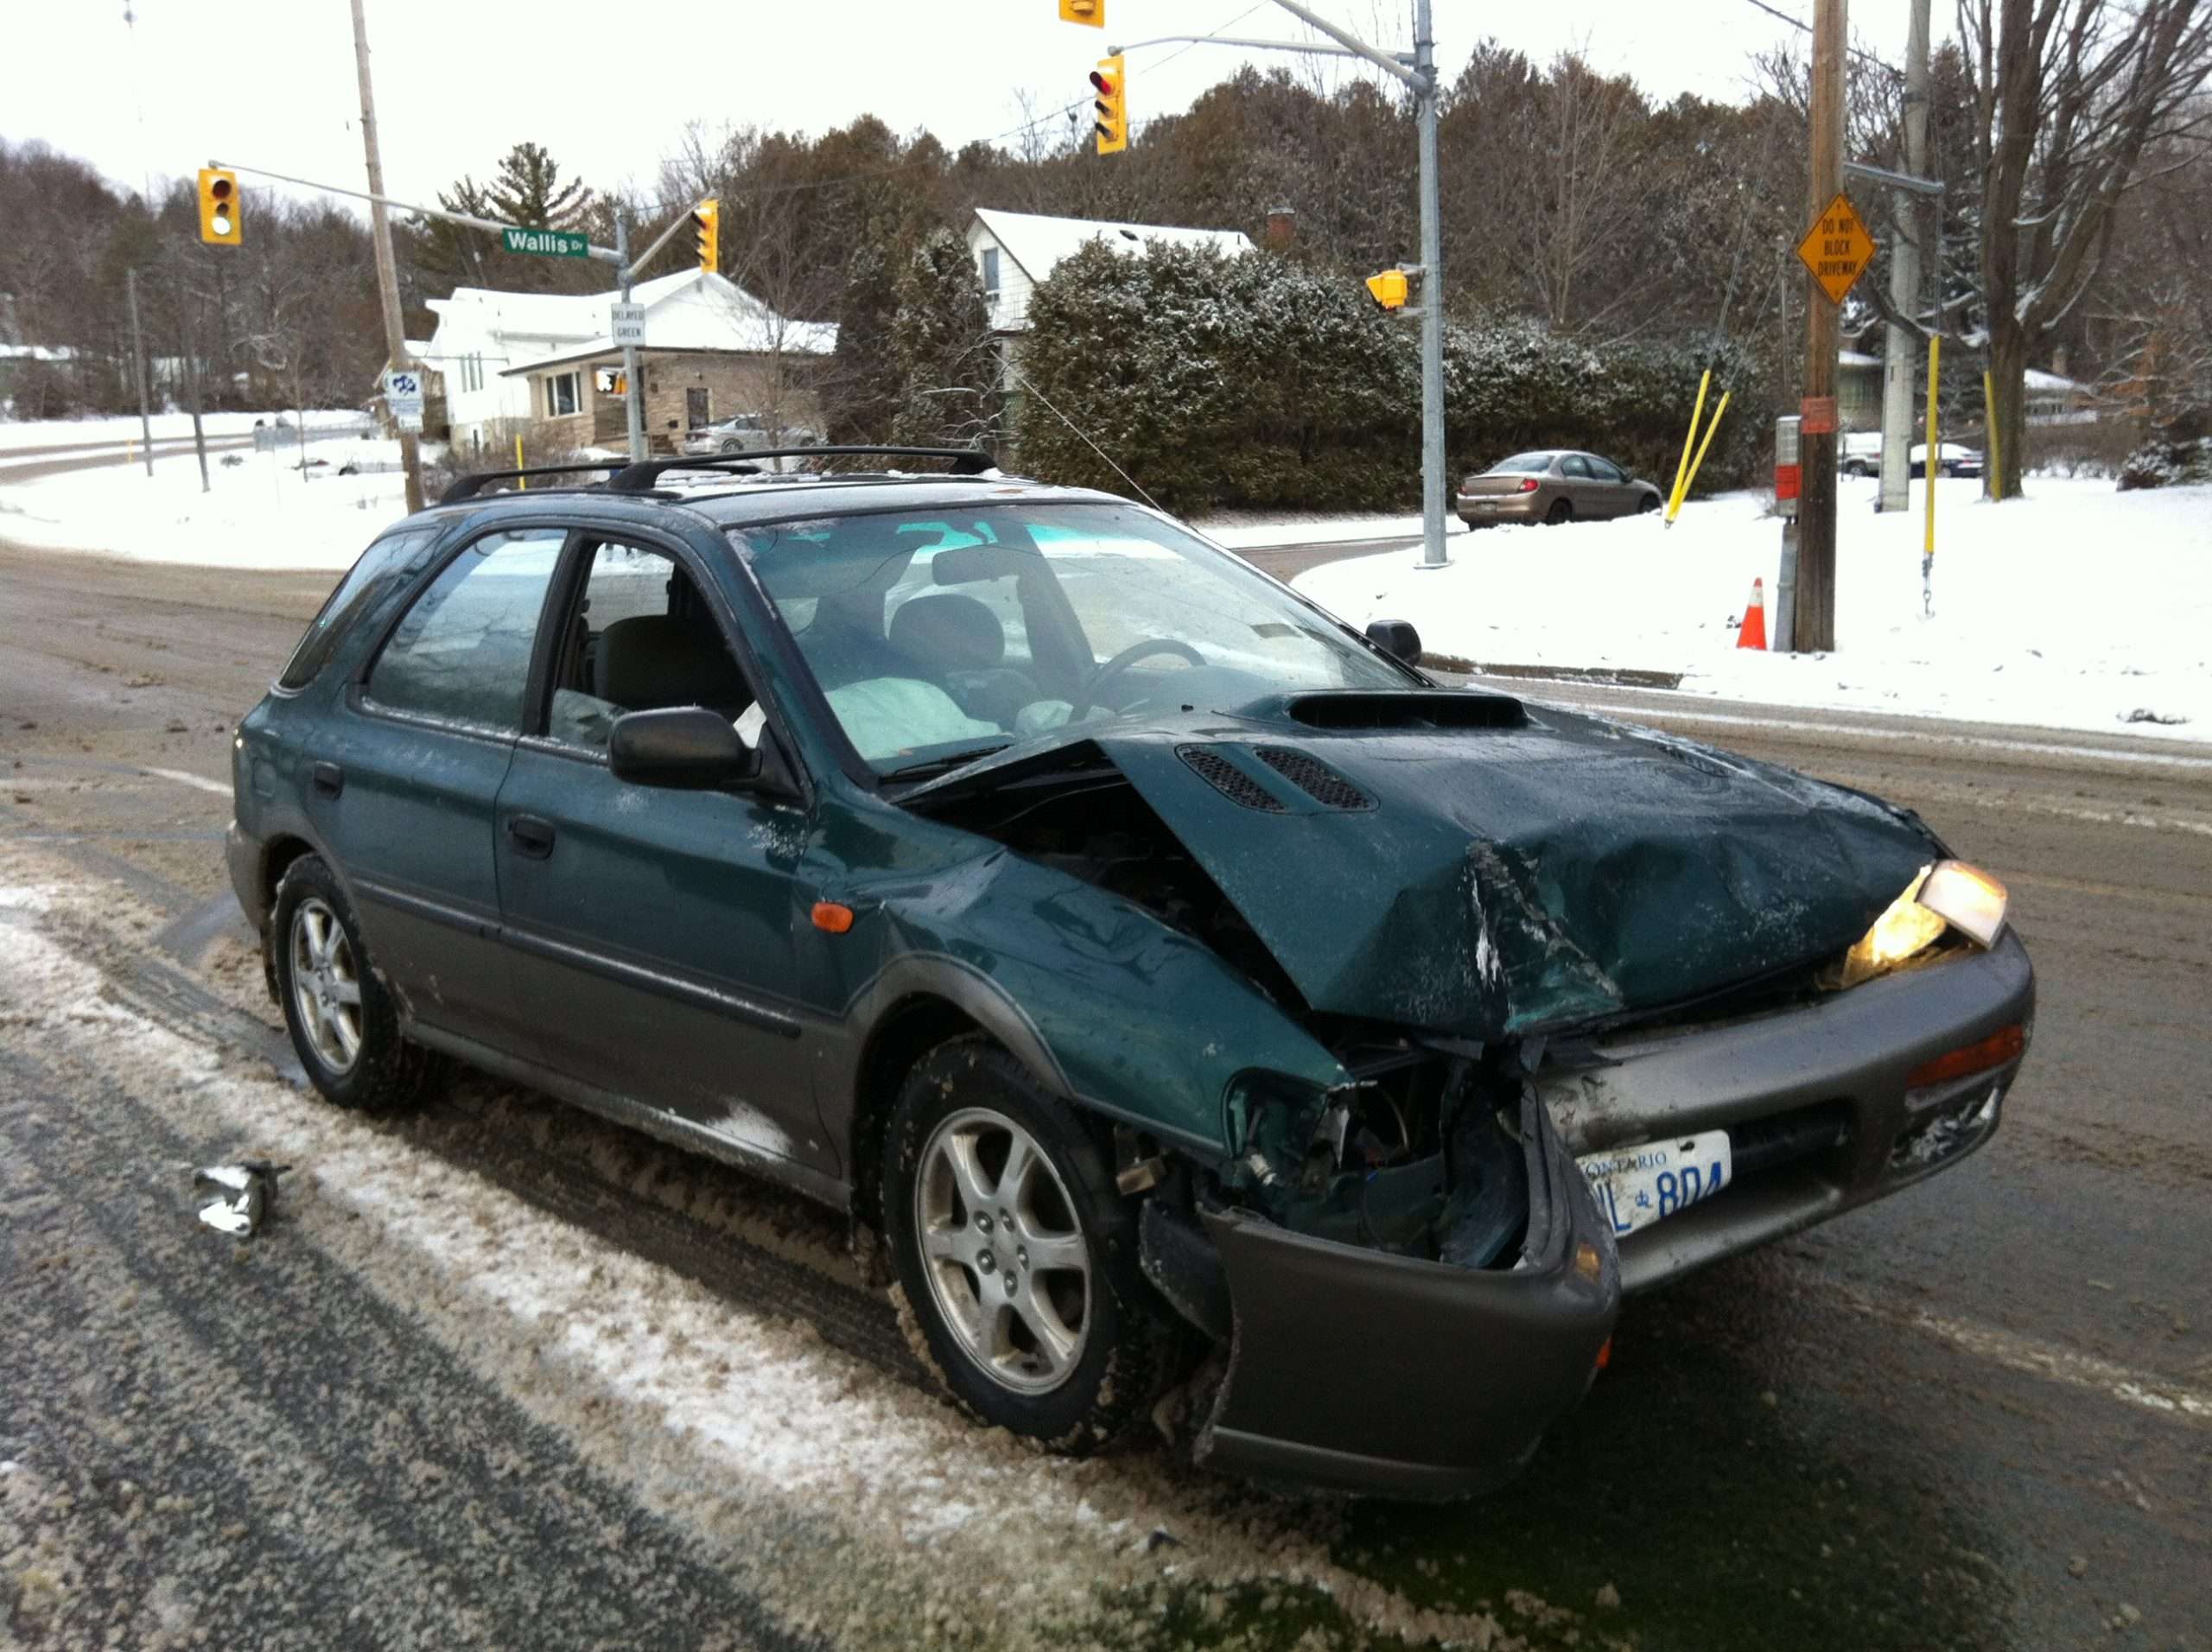 Weird but not wonderful car accident situations